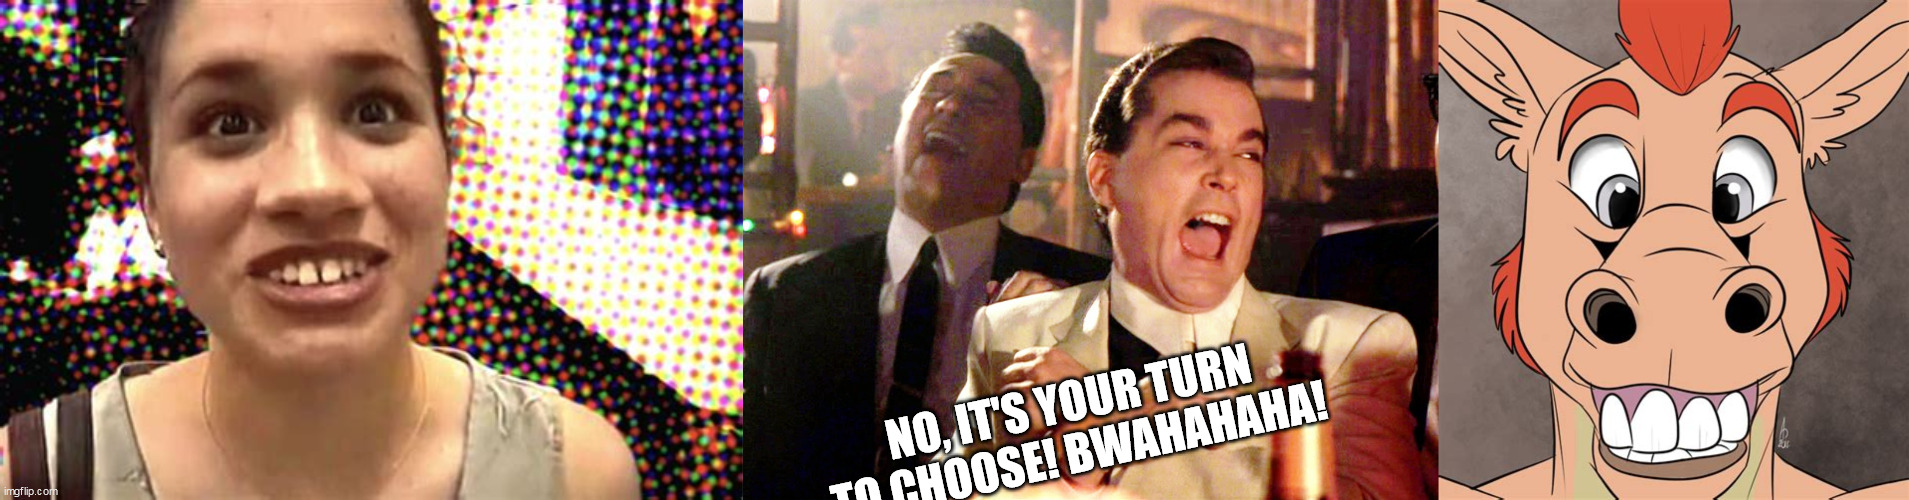 NO, IT'S YOUR TURN TO CHOOSE! BWAHAHAHA! | image tagged in memes,good fellas hilarious,meghan markle,donkey | made w/ Imgflip meme maker